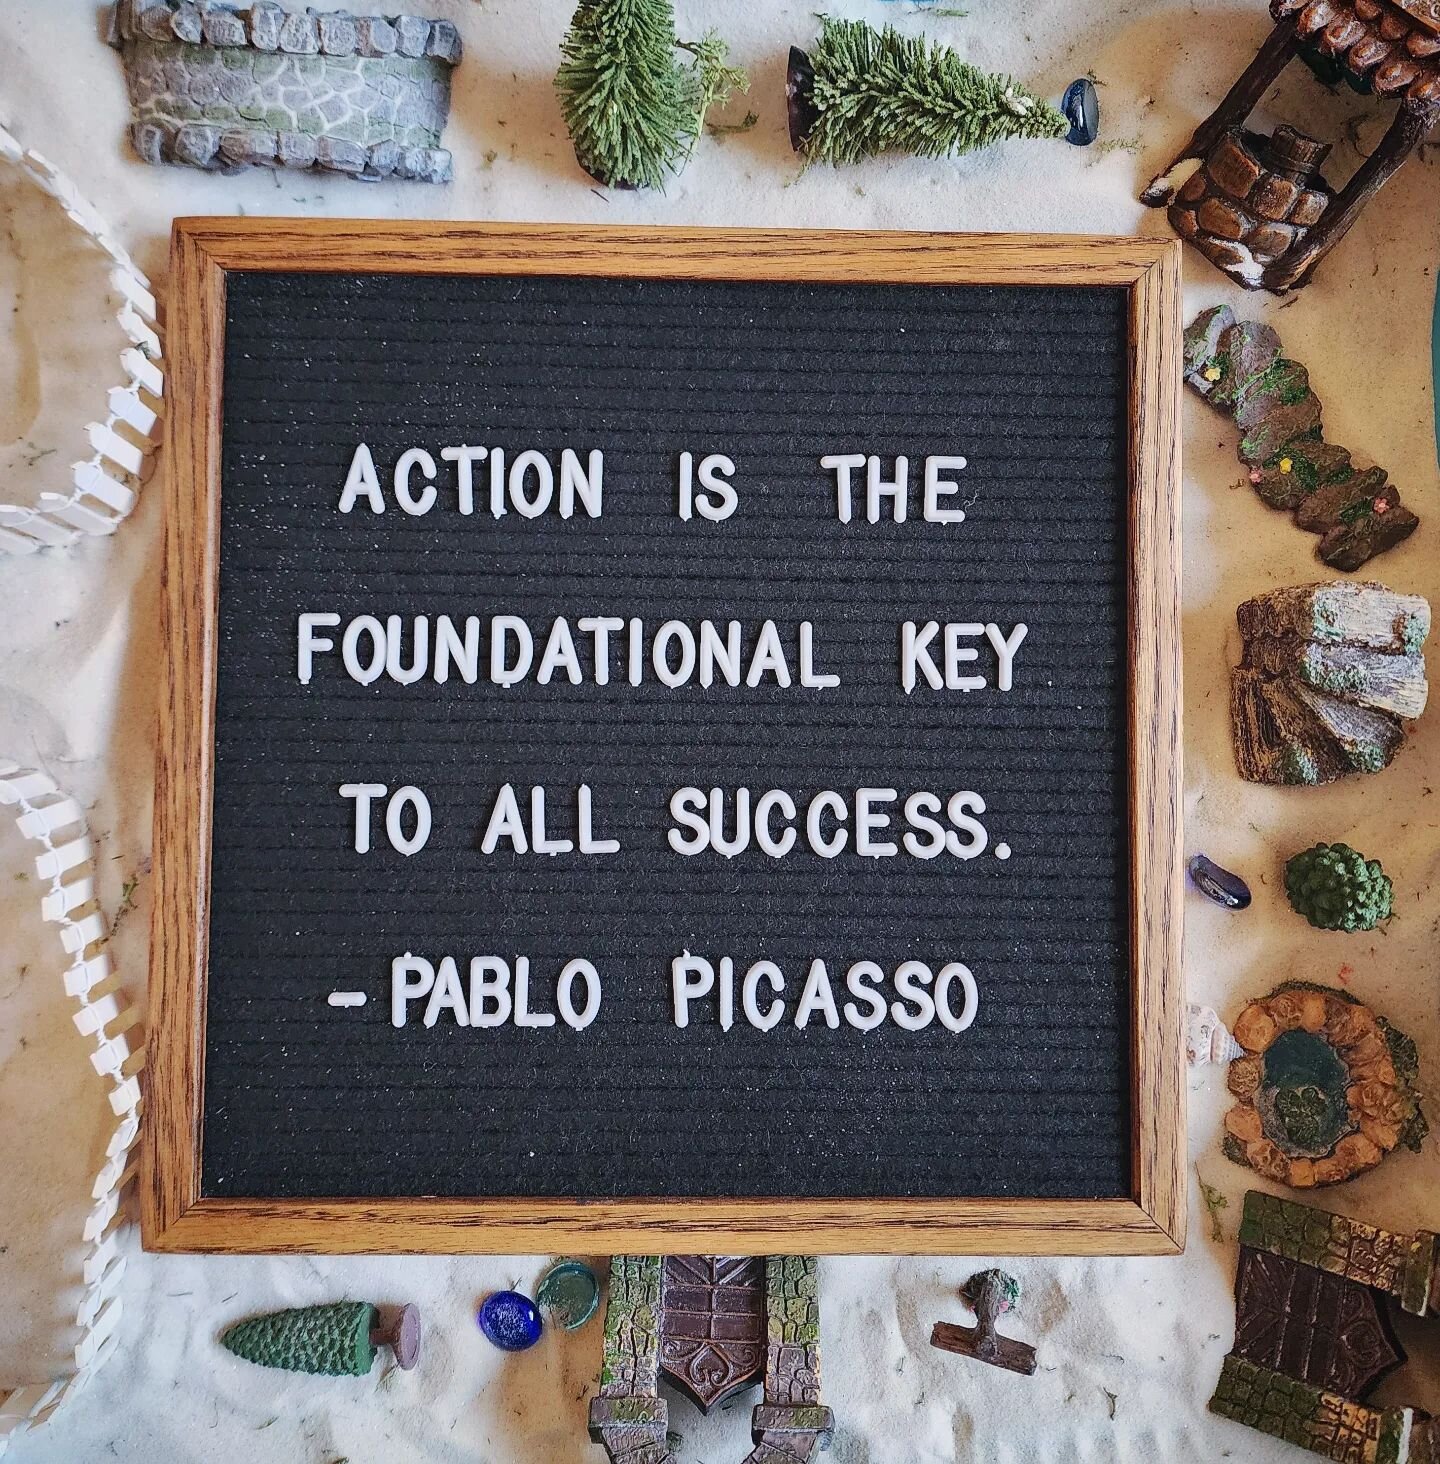 &quot;Action is the foundational key to all success.&quot; - Pablo Picasso

#wildheartscounseling #takeaction #bethechange #success #lifegoals #wellnesswednesdays  #counselingforwomen #childtherapy #teentherapy #healthymind #positivelife #anxiety #de